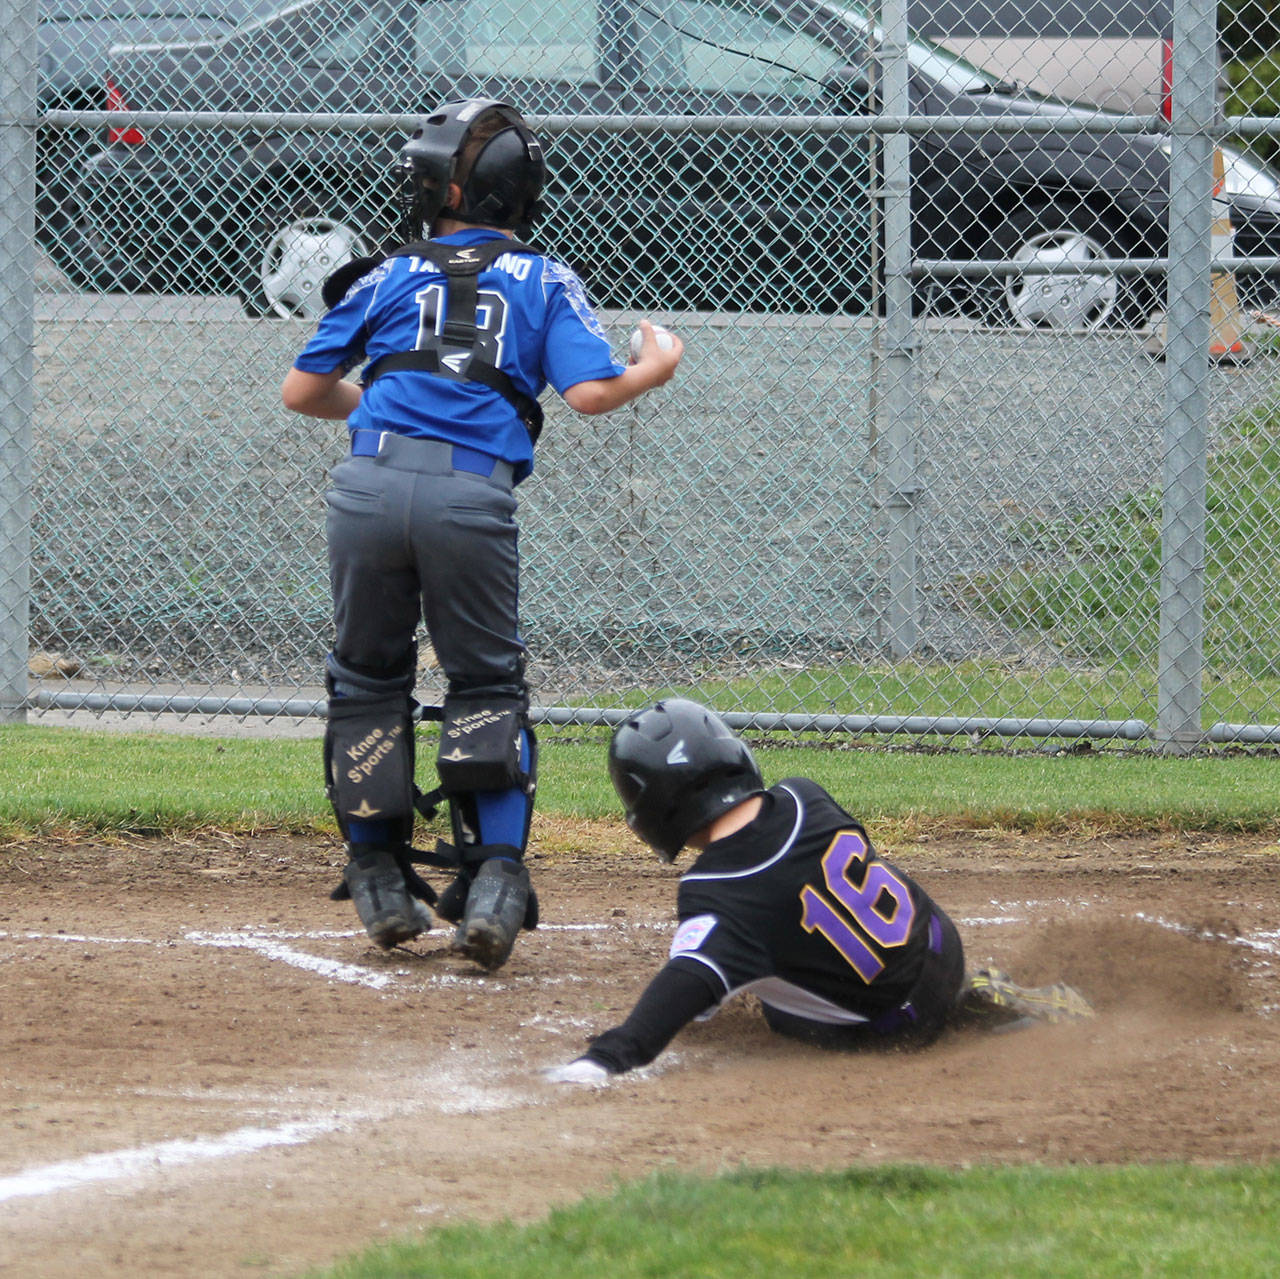 Dylan Ebersberger slides in a force play at the plate.(Photo by Jim Waller/Whidbey News-Times)